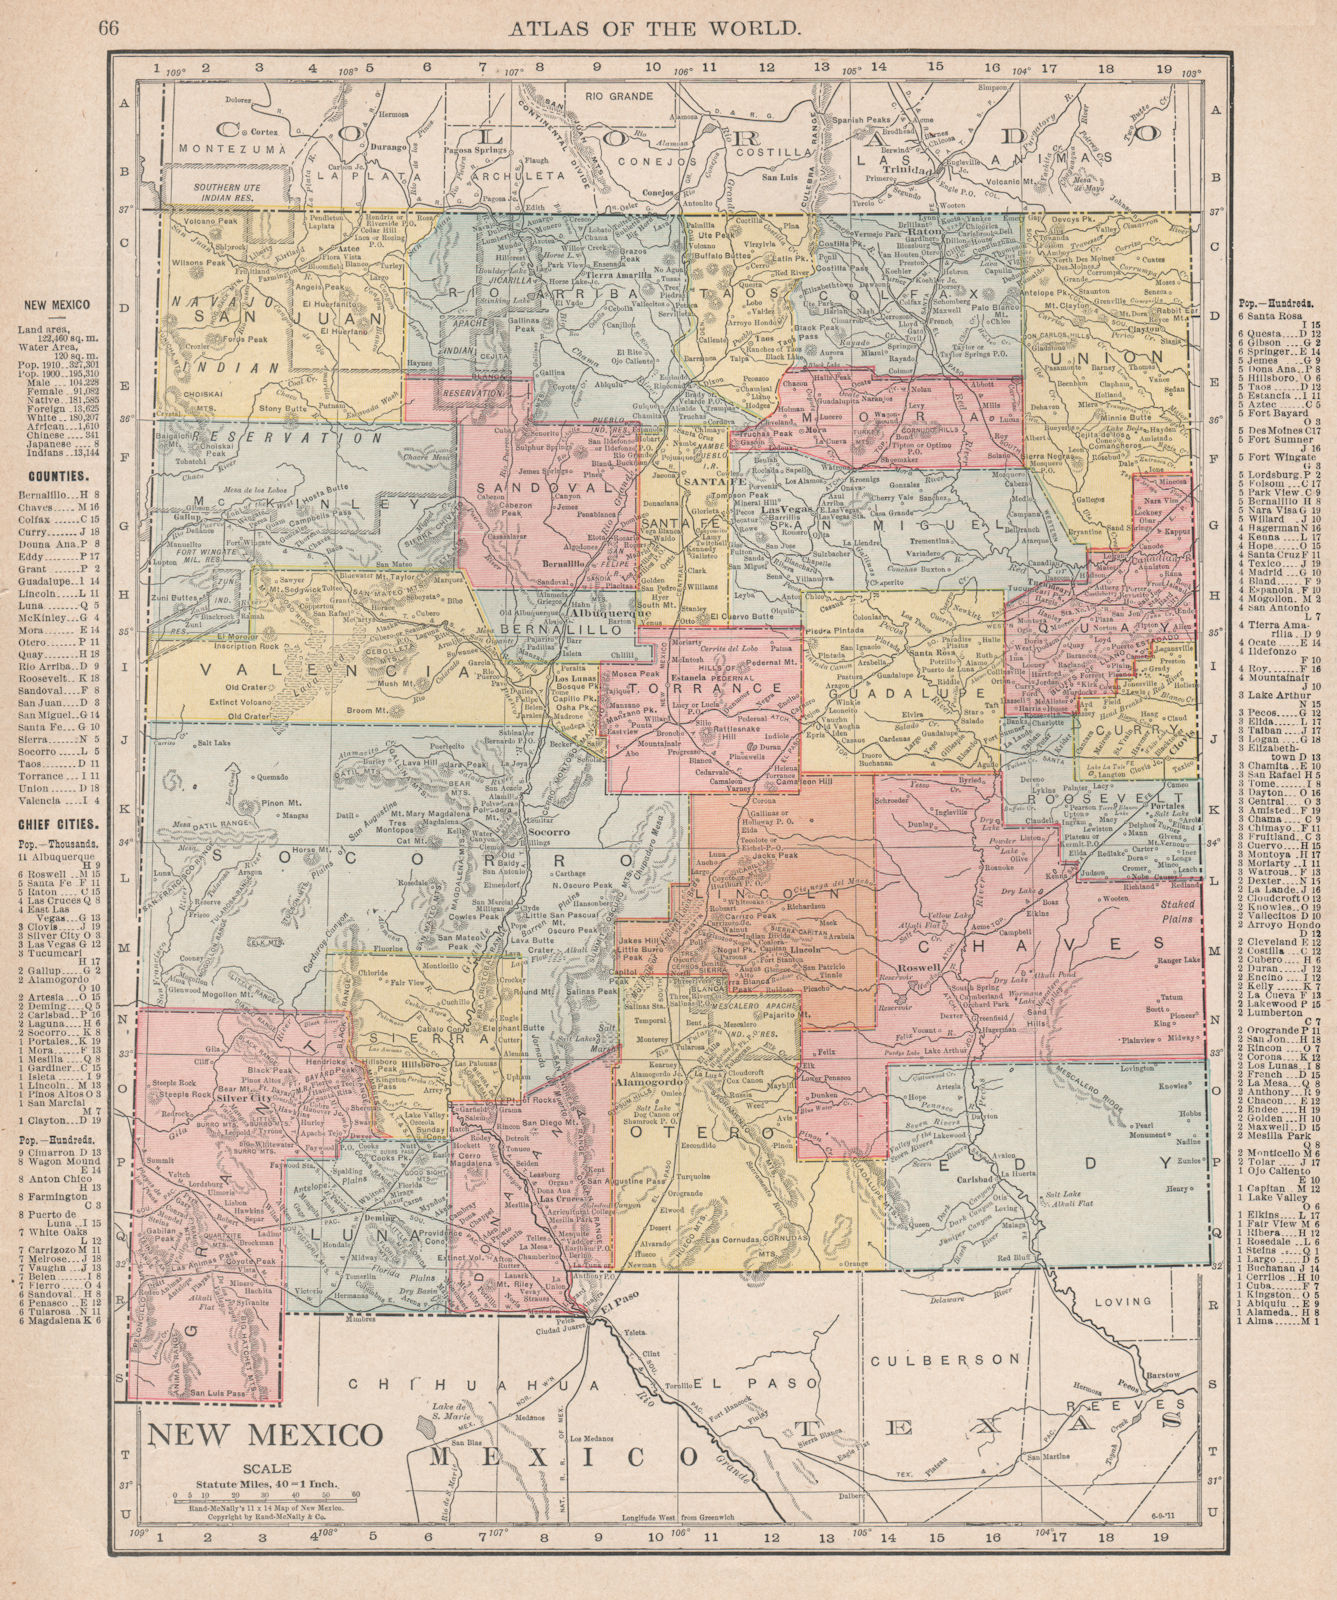 New Mexico state map showing counties. RAND MCNALLY 1912 old antique chart